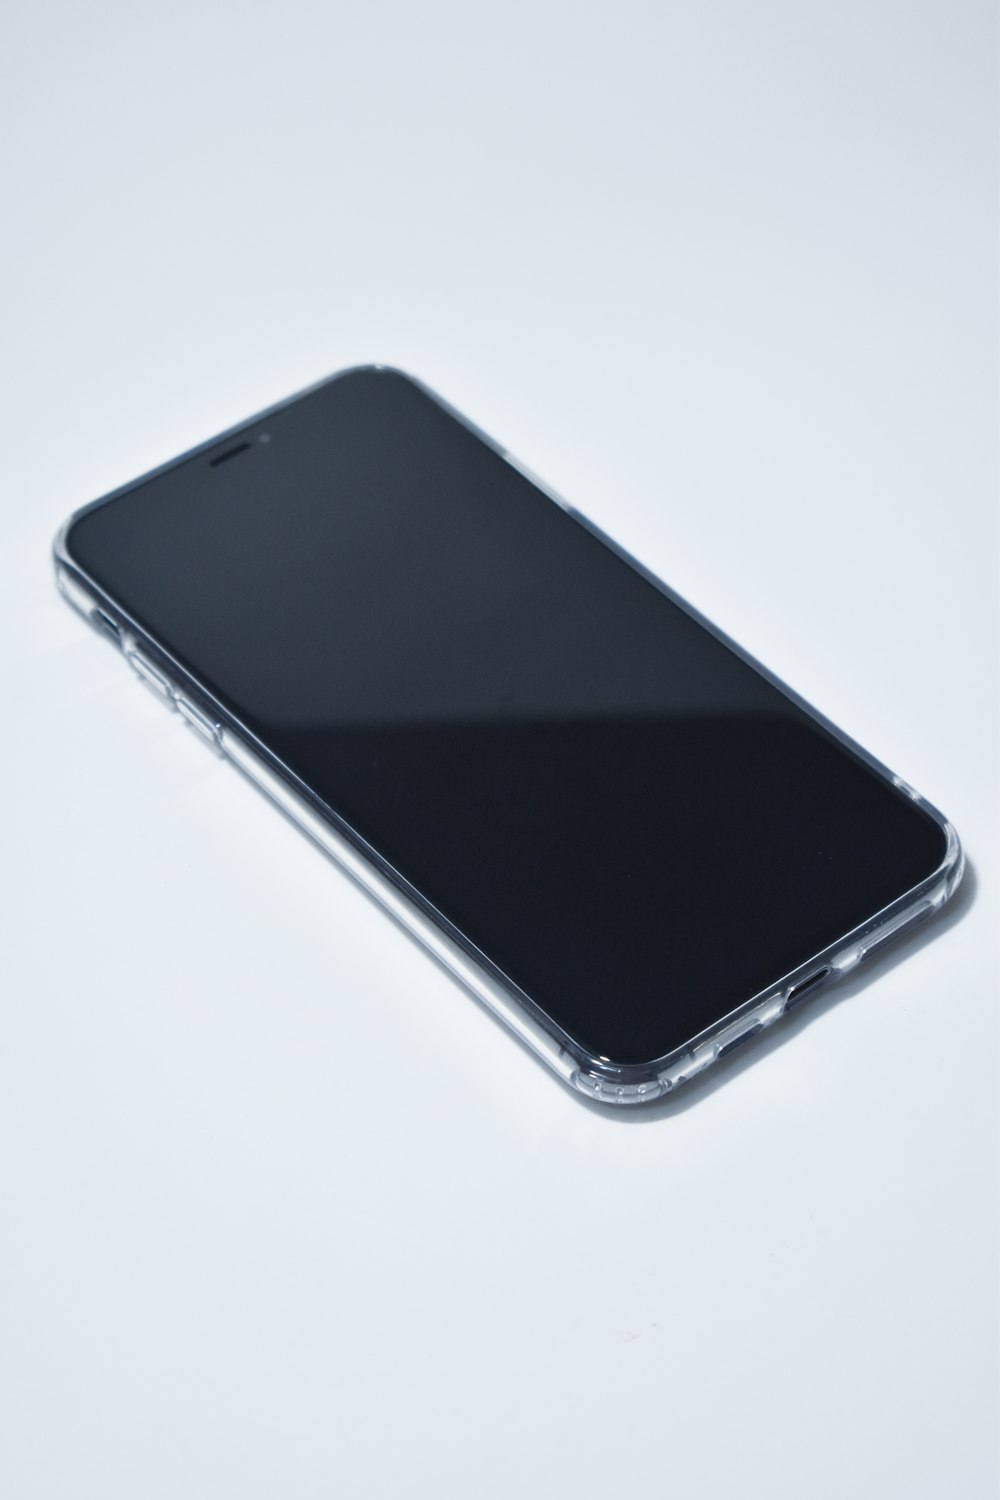 black android smartphone on white surface